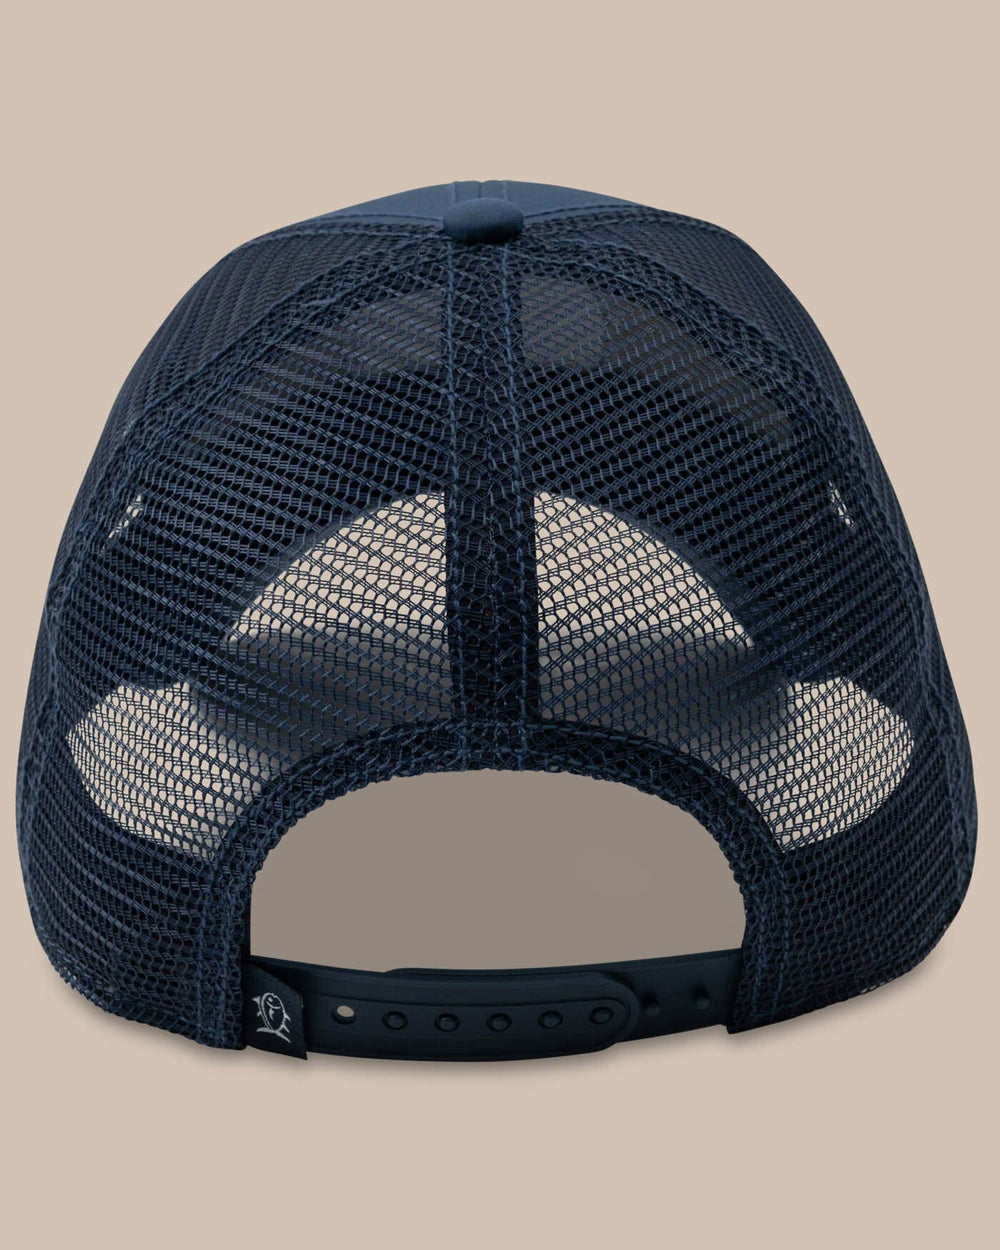 The back view of the Men's Texas Patch Performance Trucker Hat by Southern Tide - Seven Seas Blue